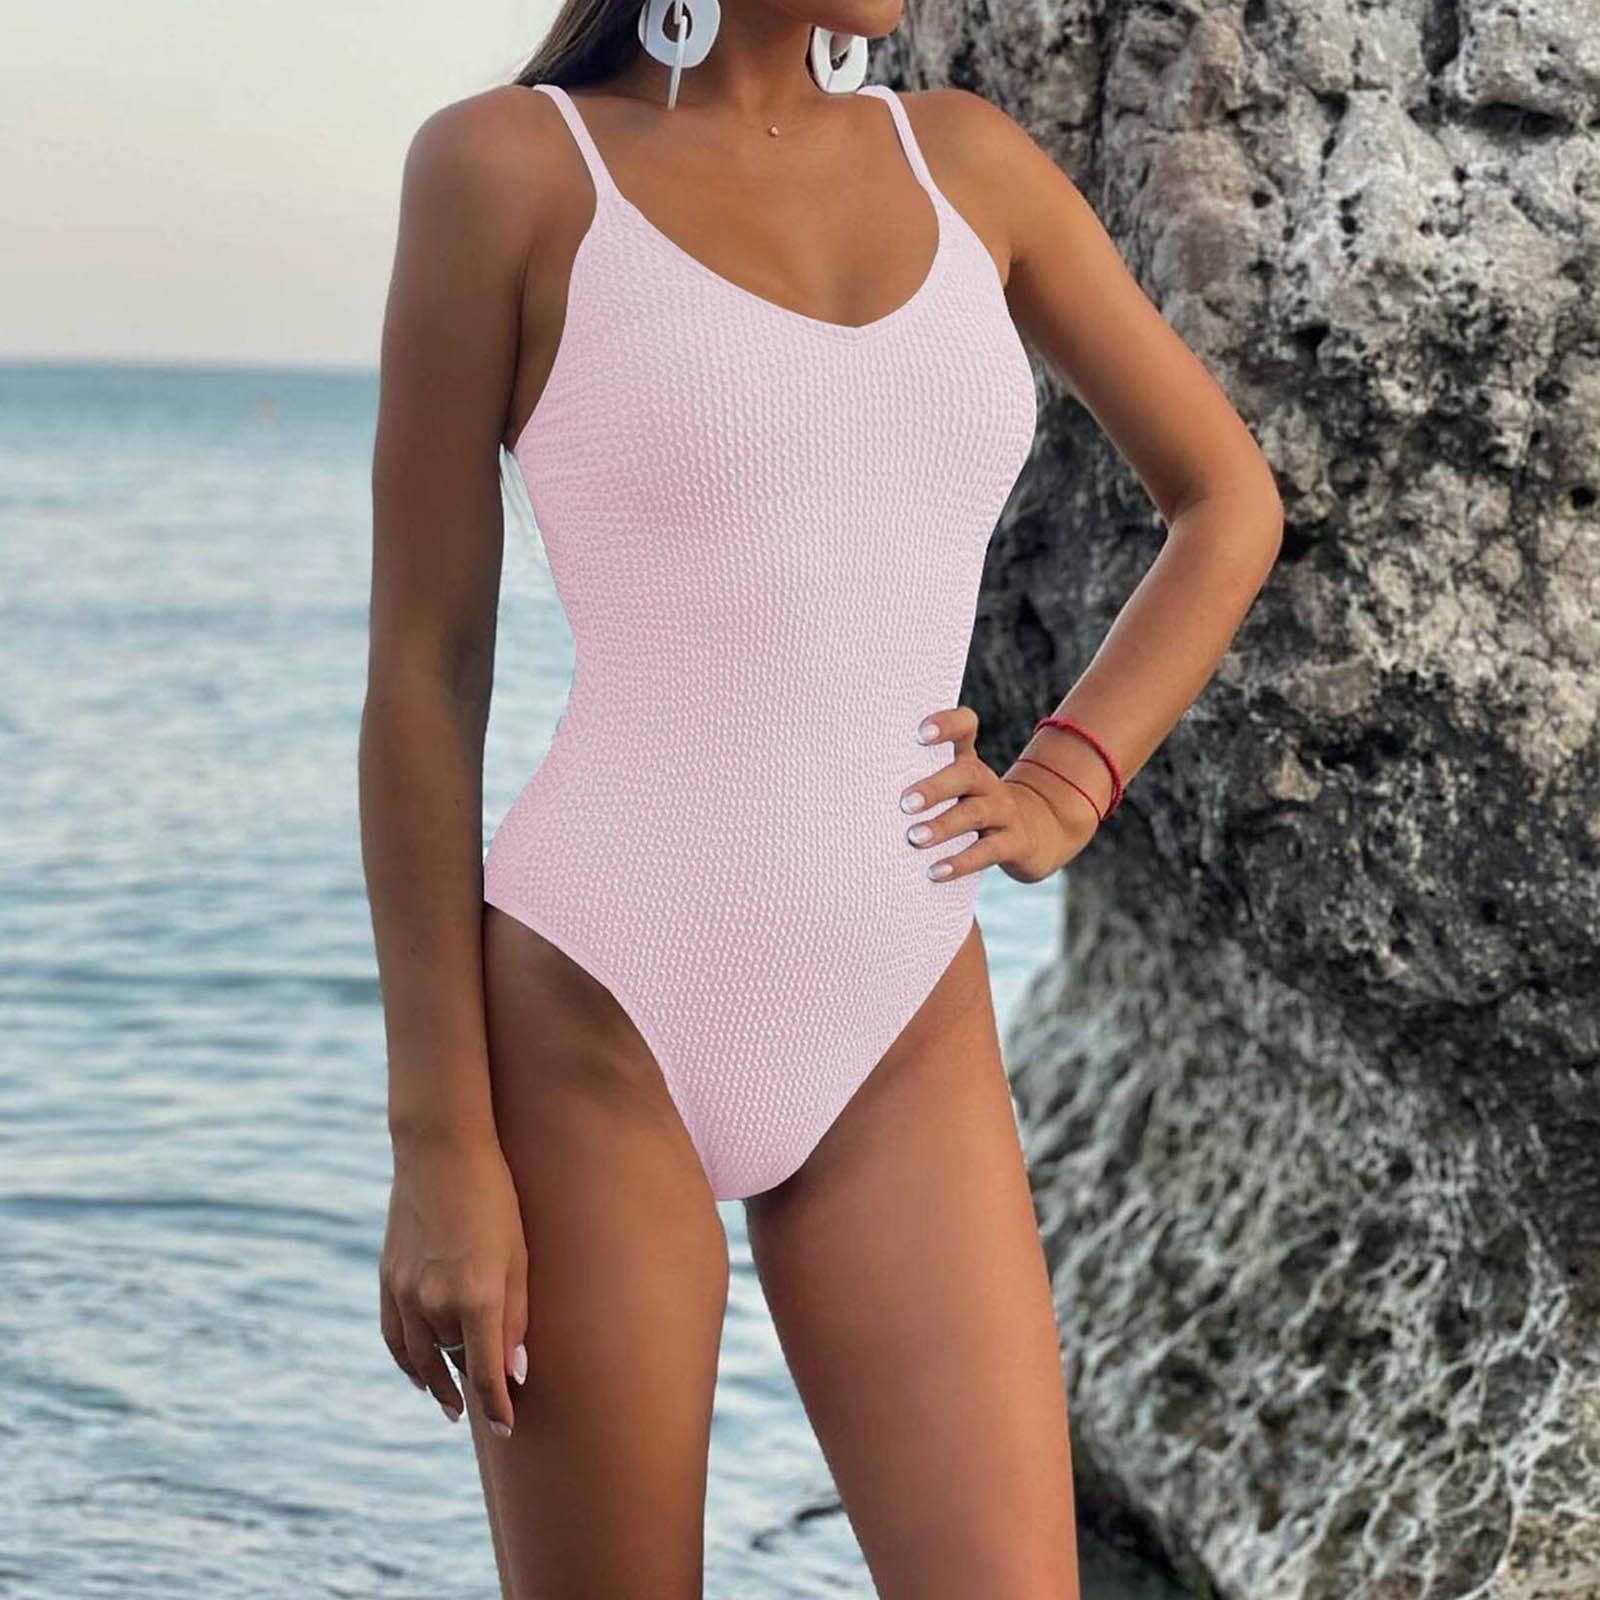 Njoeus One Piece Bathing Suit For Women High Waisted Swimsuits For Women  Women'S 23 New Fashion Style With Bra Pad, No Steel Support, Multi-Color  New Fashion One-Piece Swimsuit, Sexy Solid Color Swims 